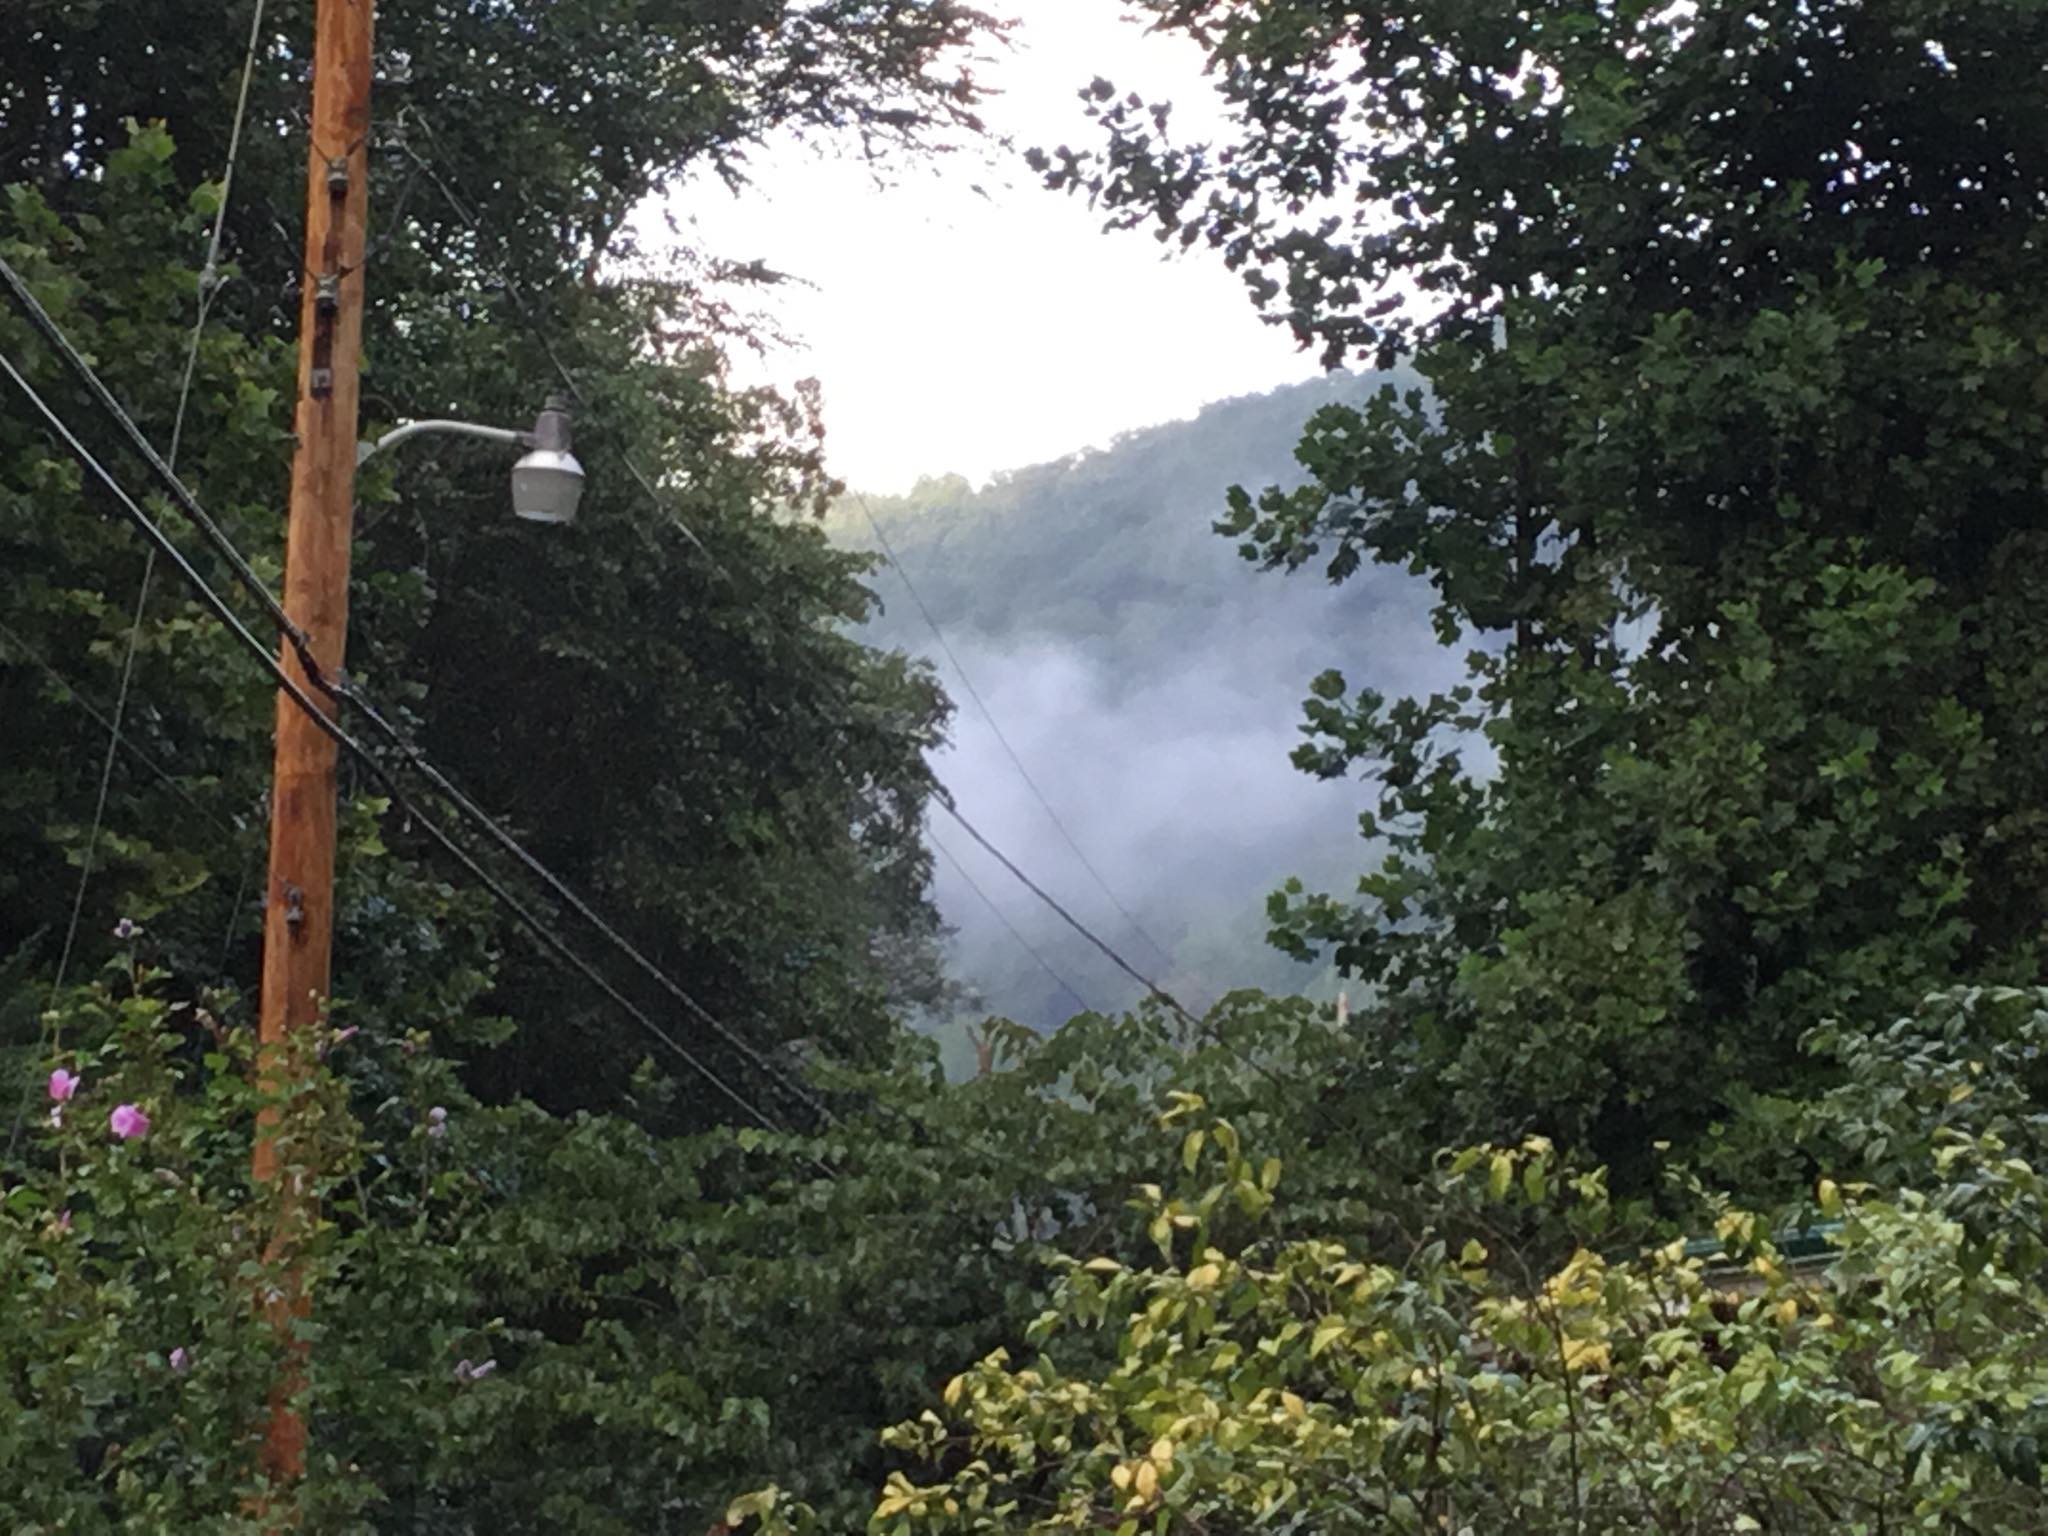 A cloud of coal mine dust over a West Virginia community points to regulatory blindspots